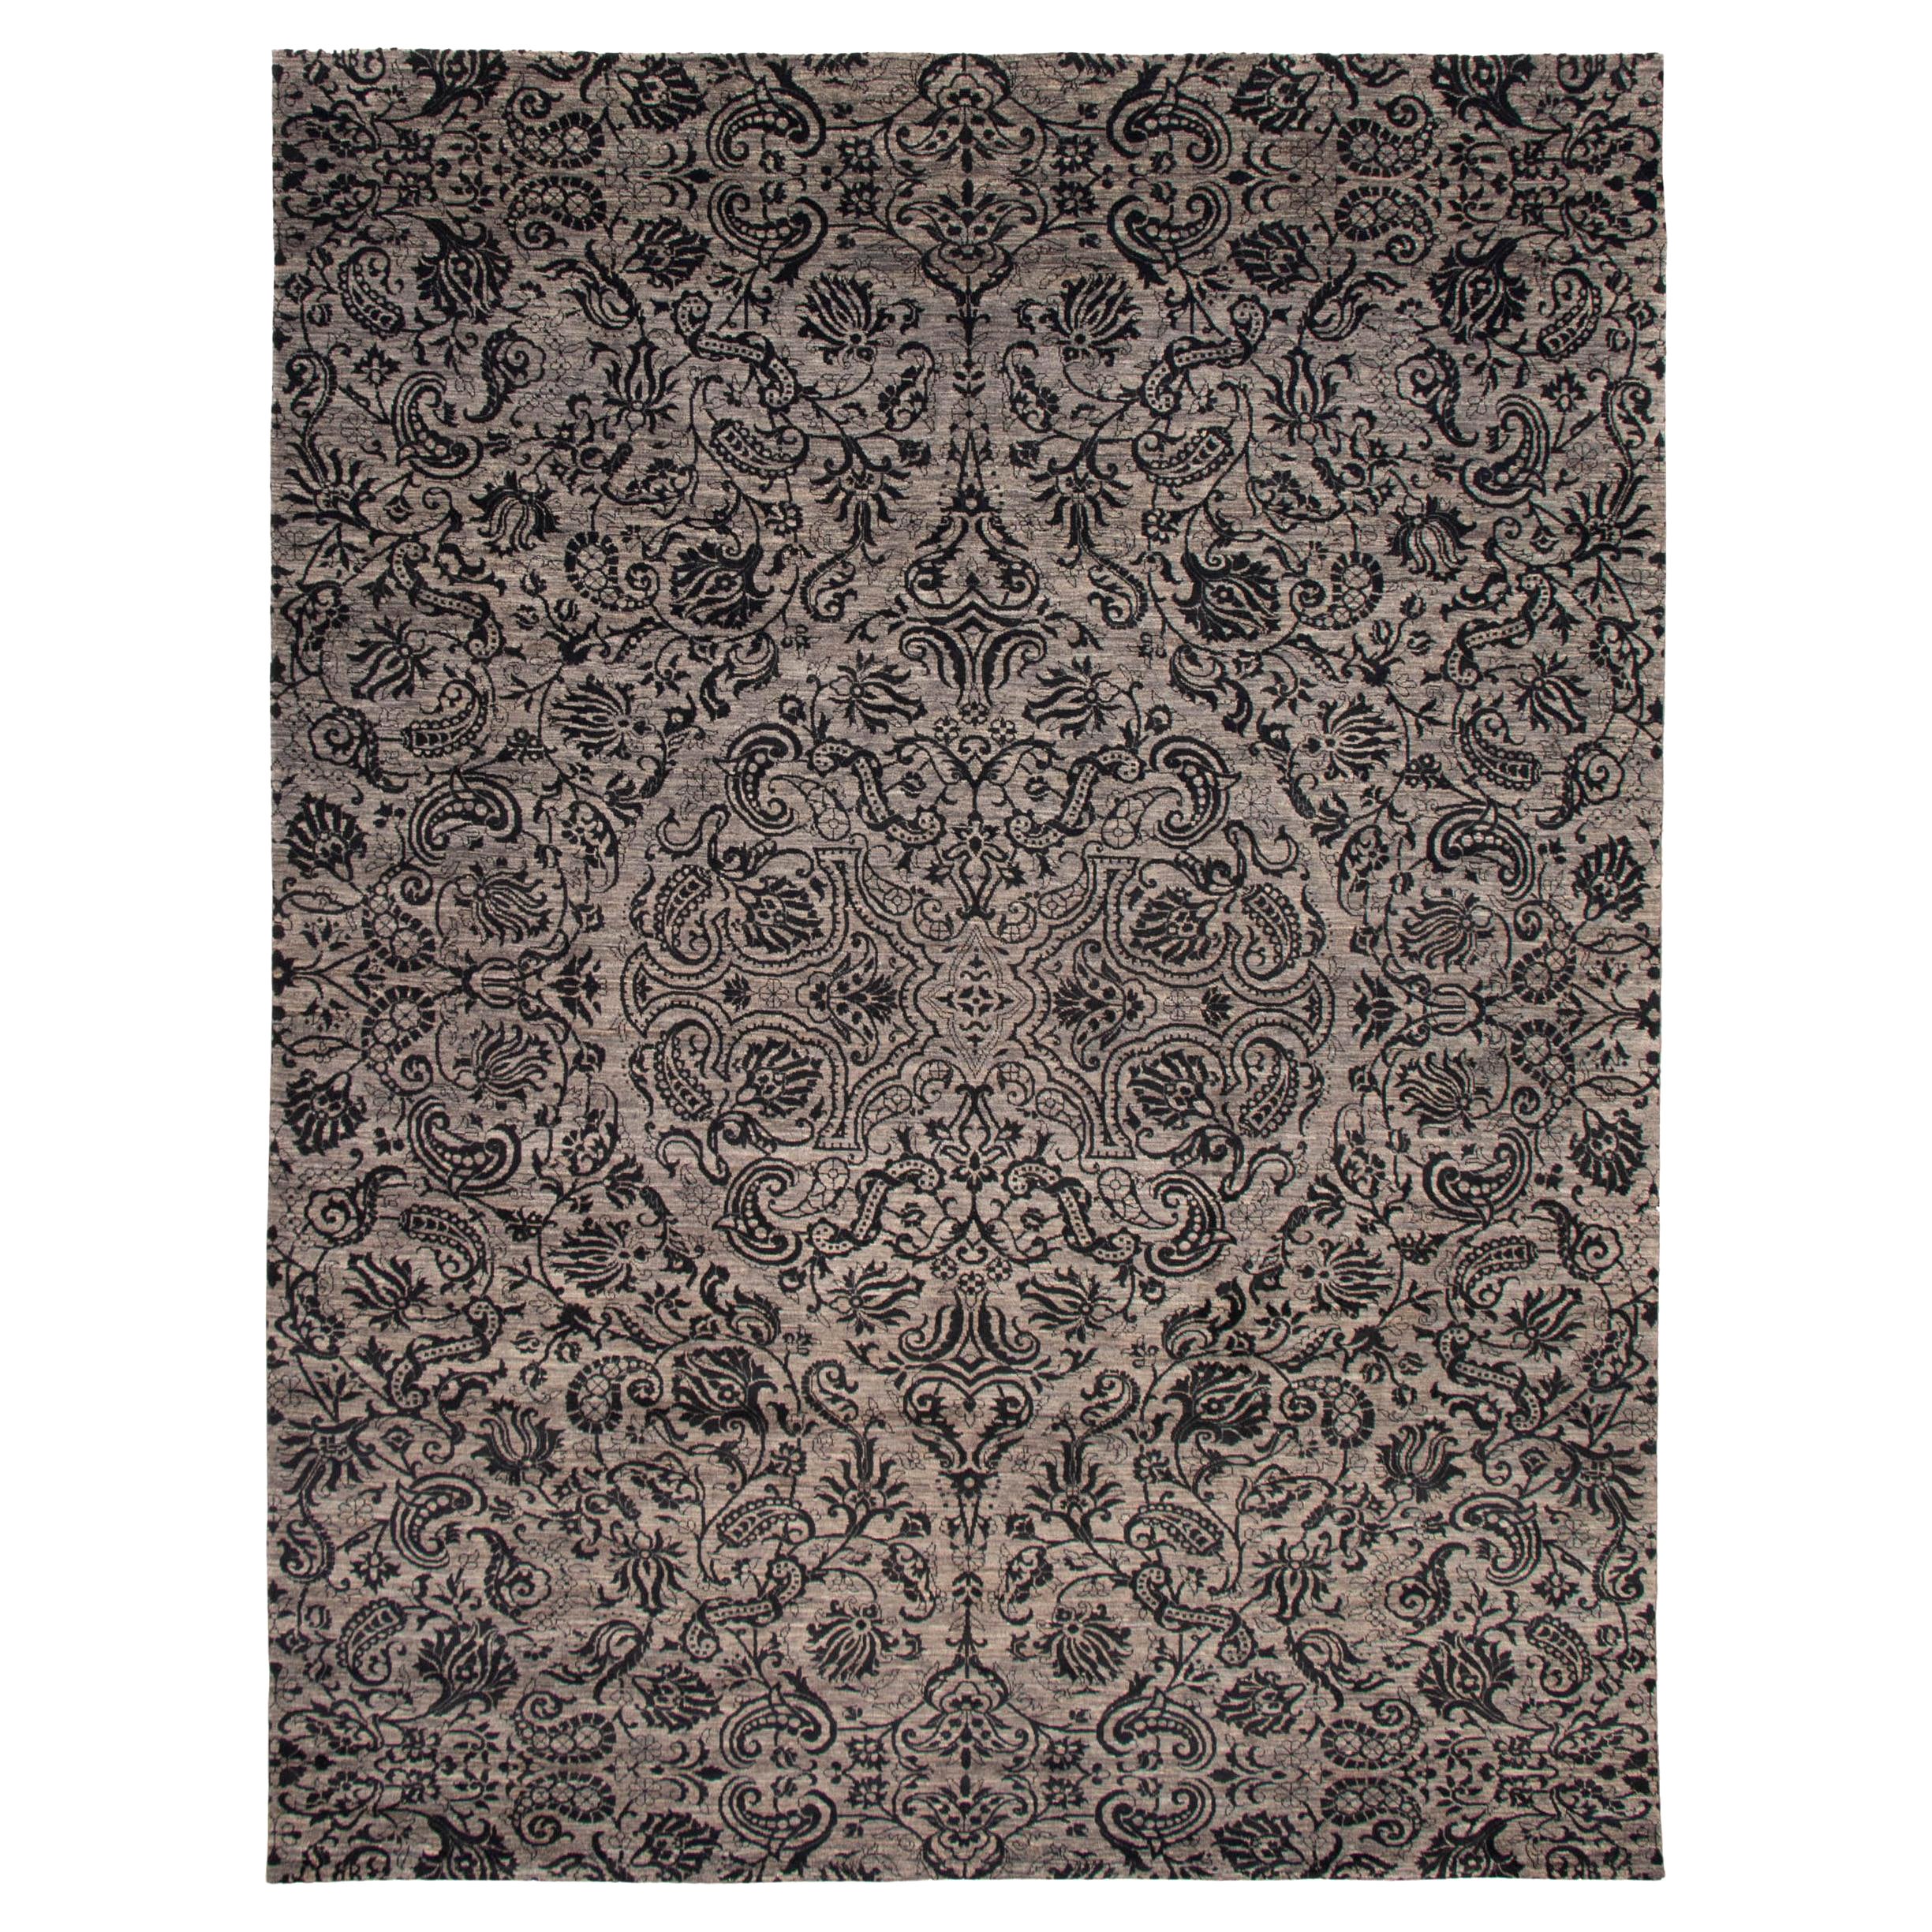 Gray and Black Wool Transitional Paisley Hand-Knotted Carpet, 9' x 12'